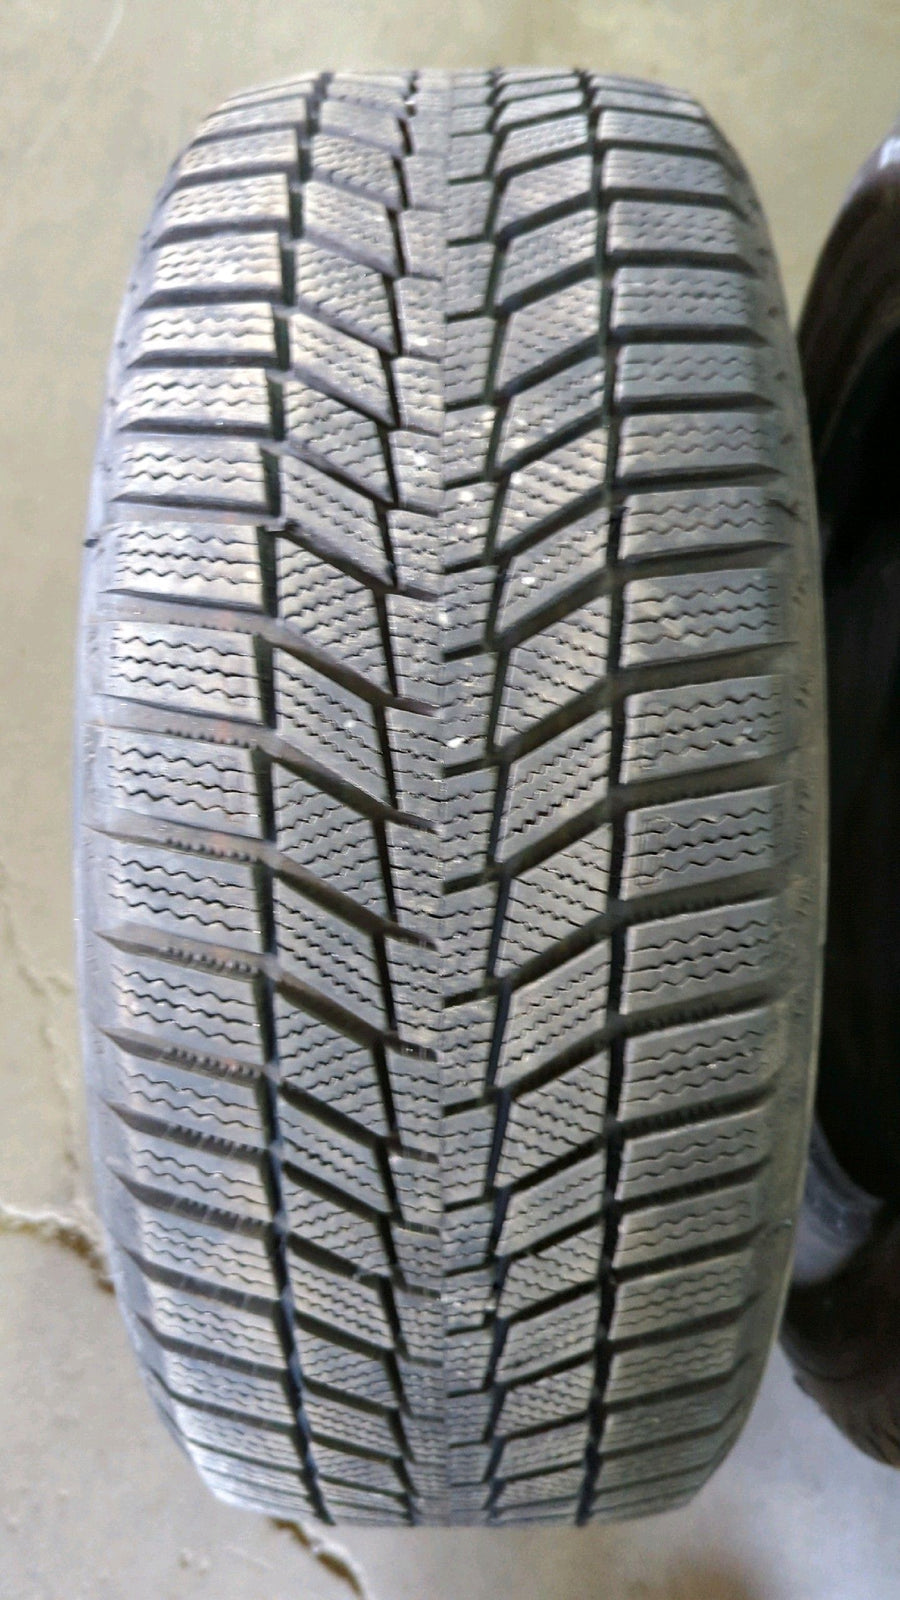 4 x P195/55R16 91H Continental WinterContact SI Plus